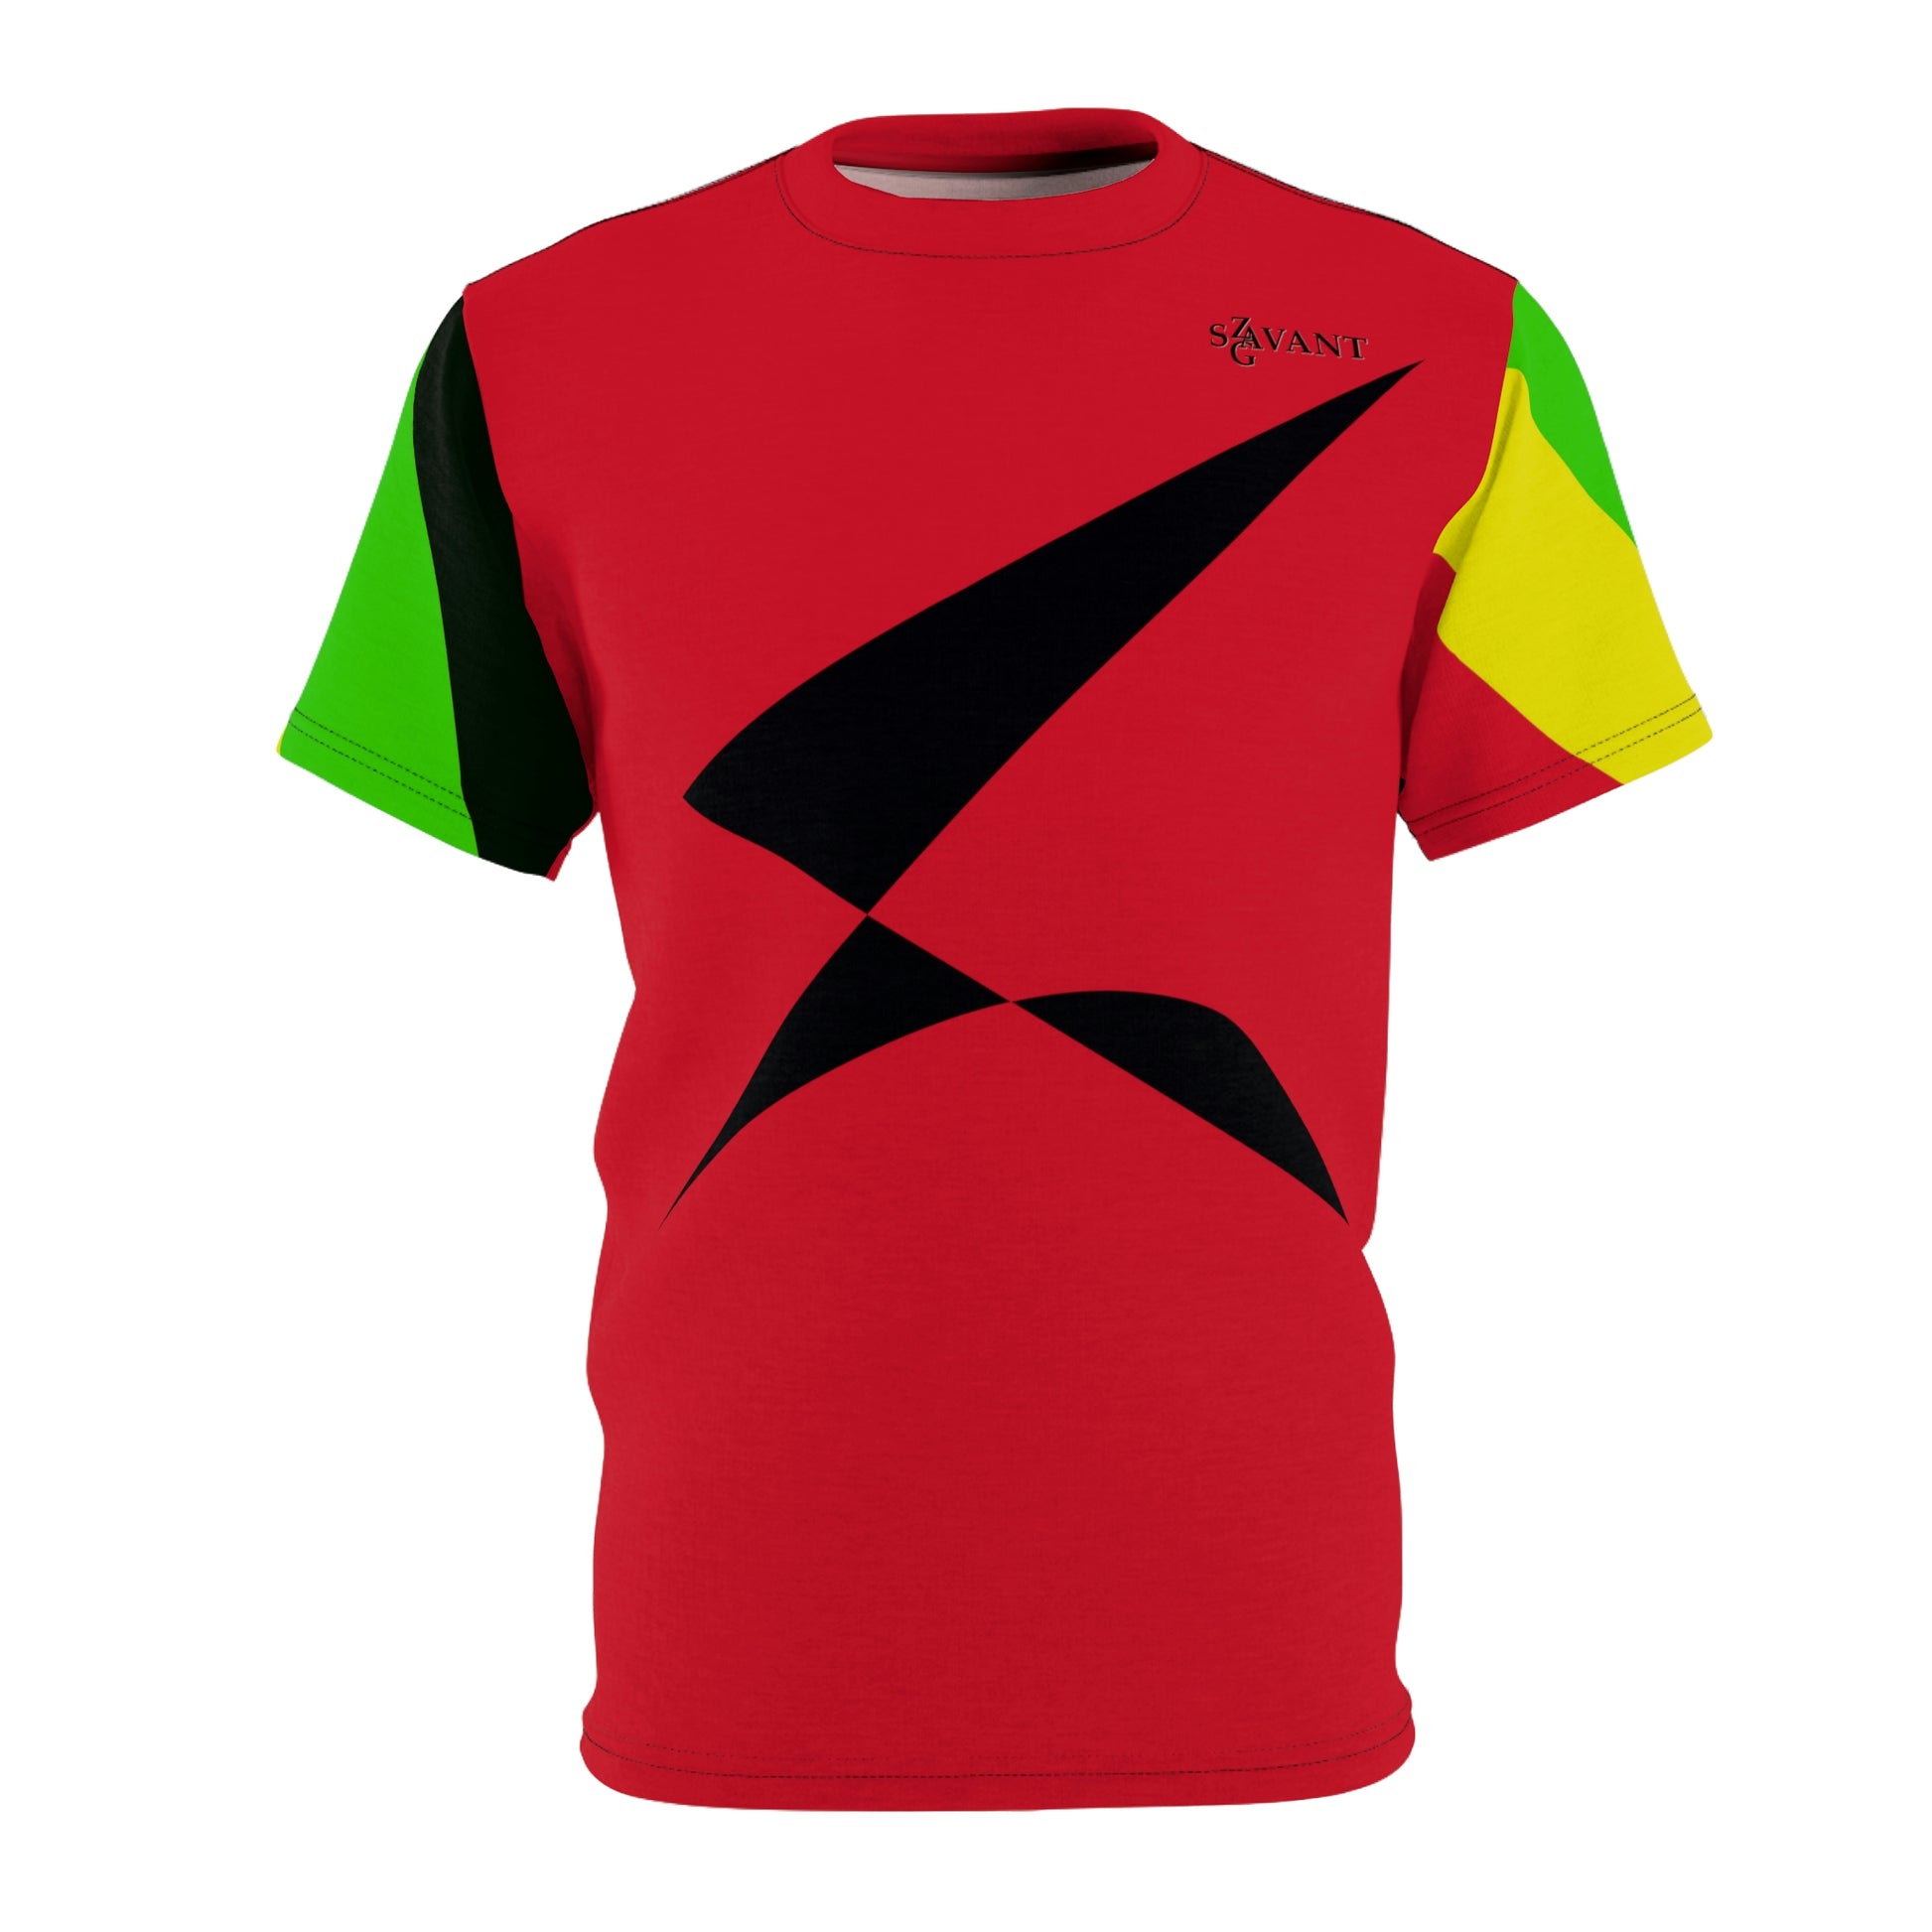 Men’s T-shirt - Red and Black